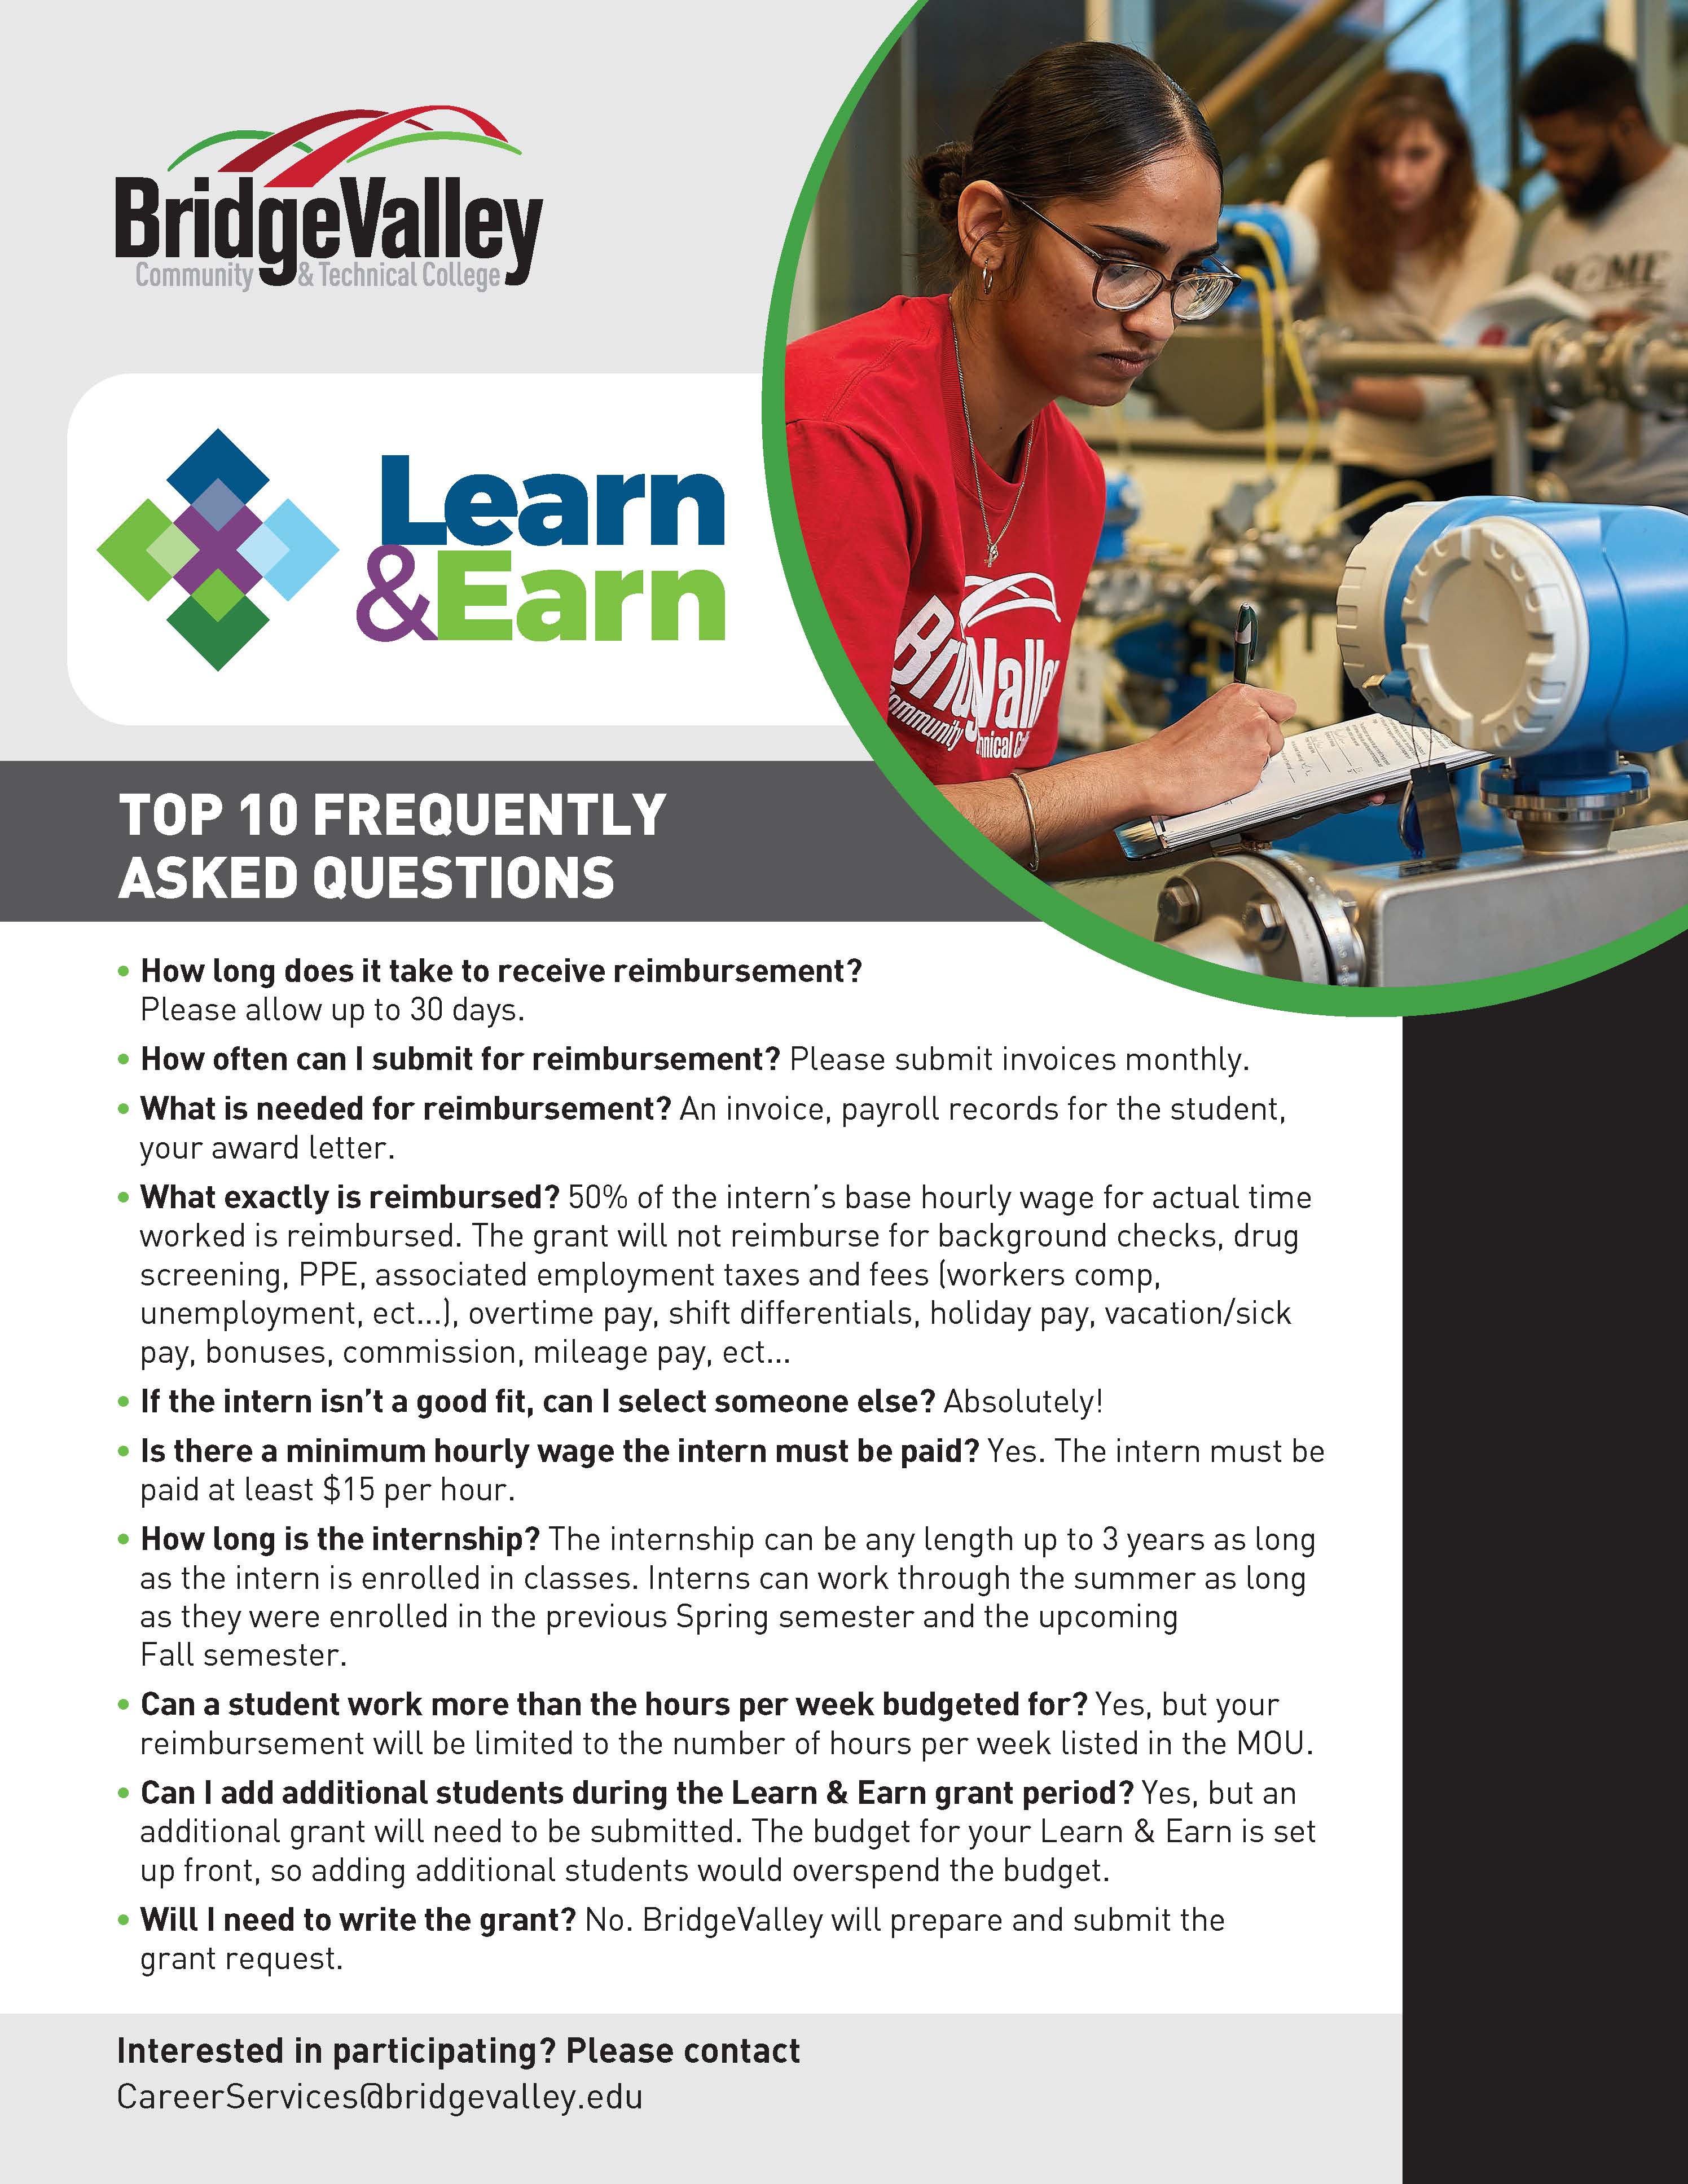 Learn and Earn page 2